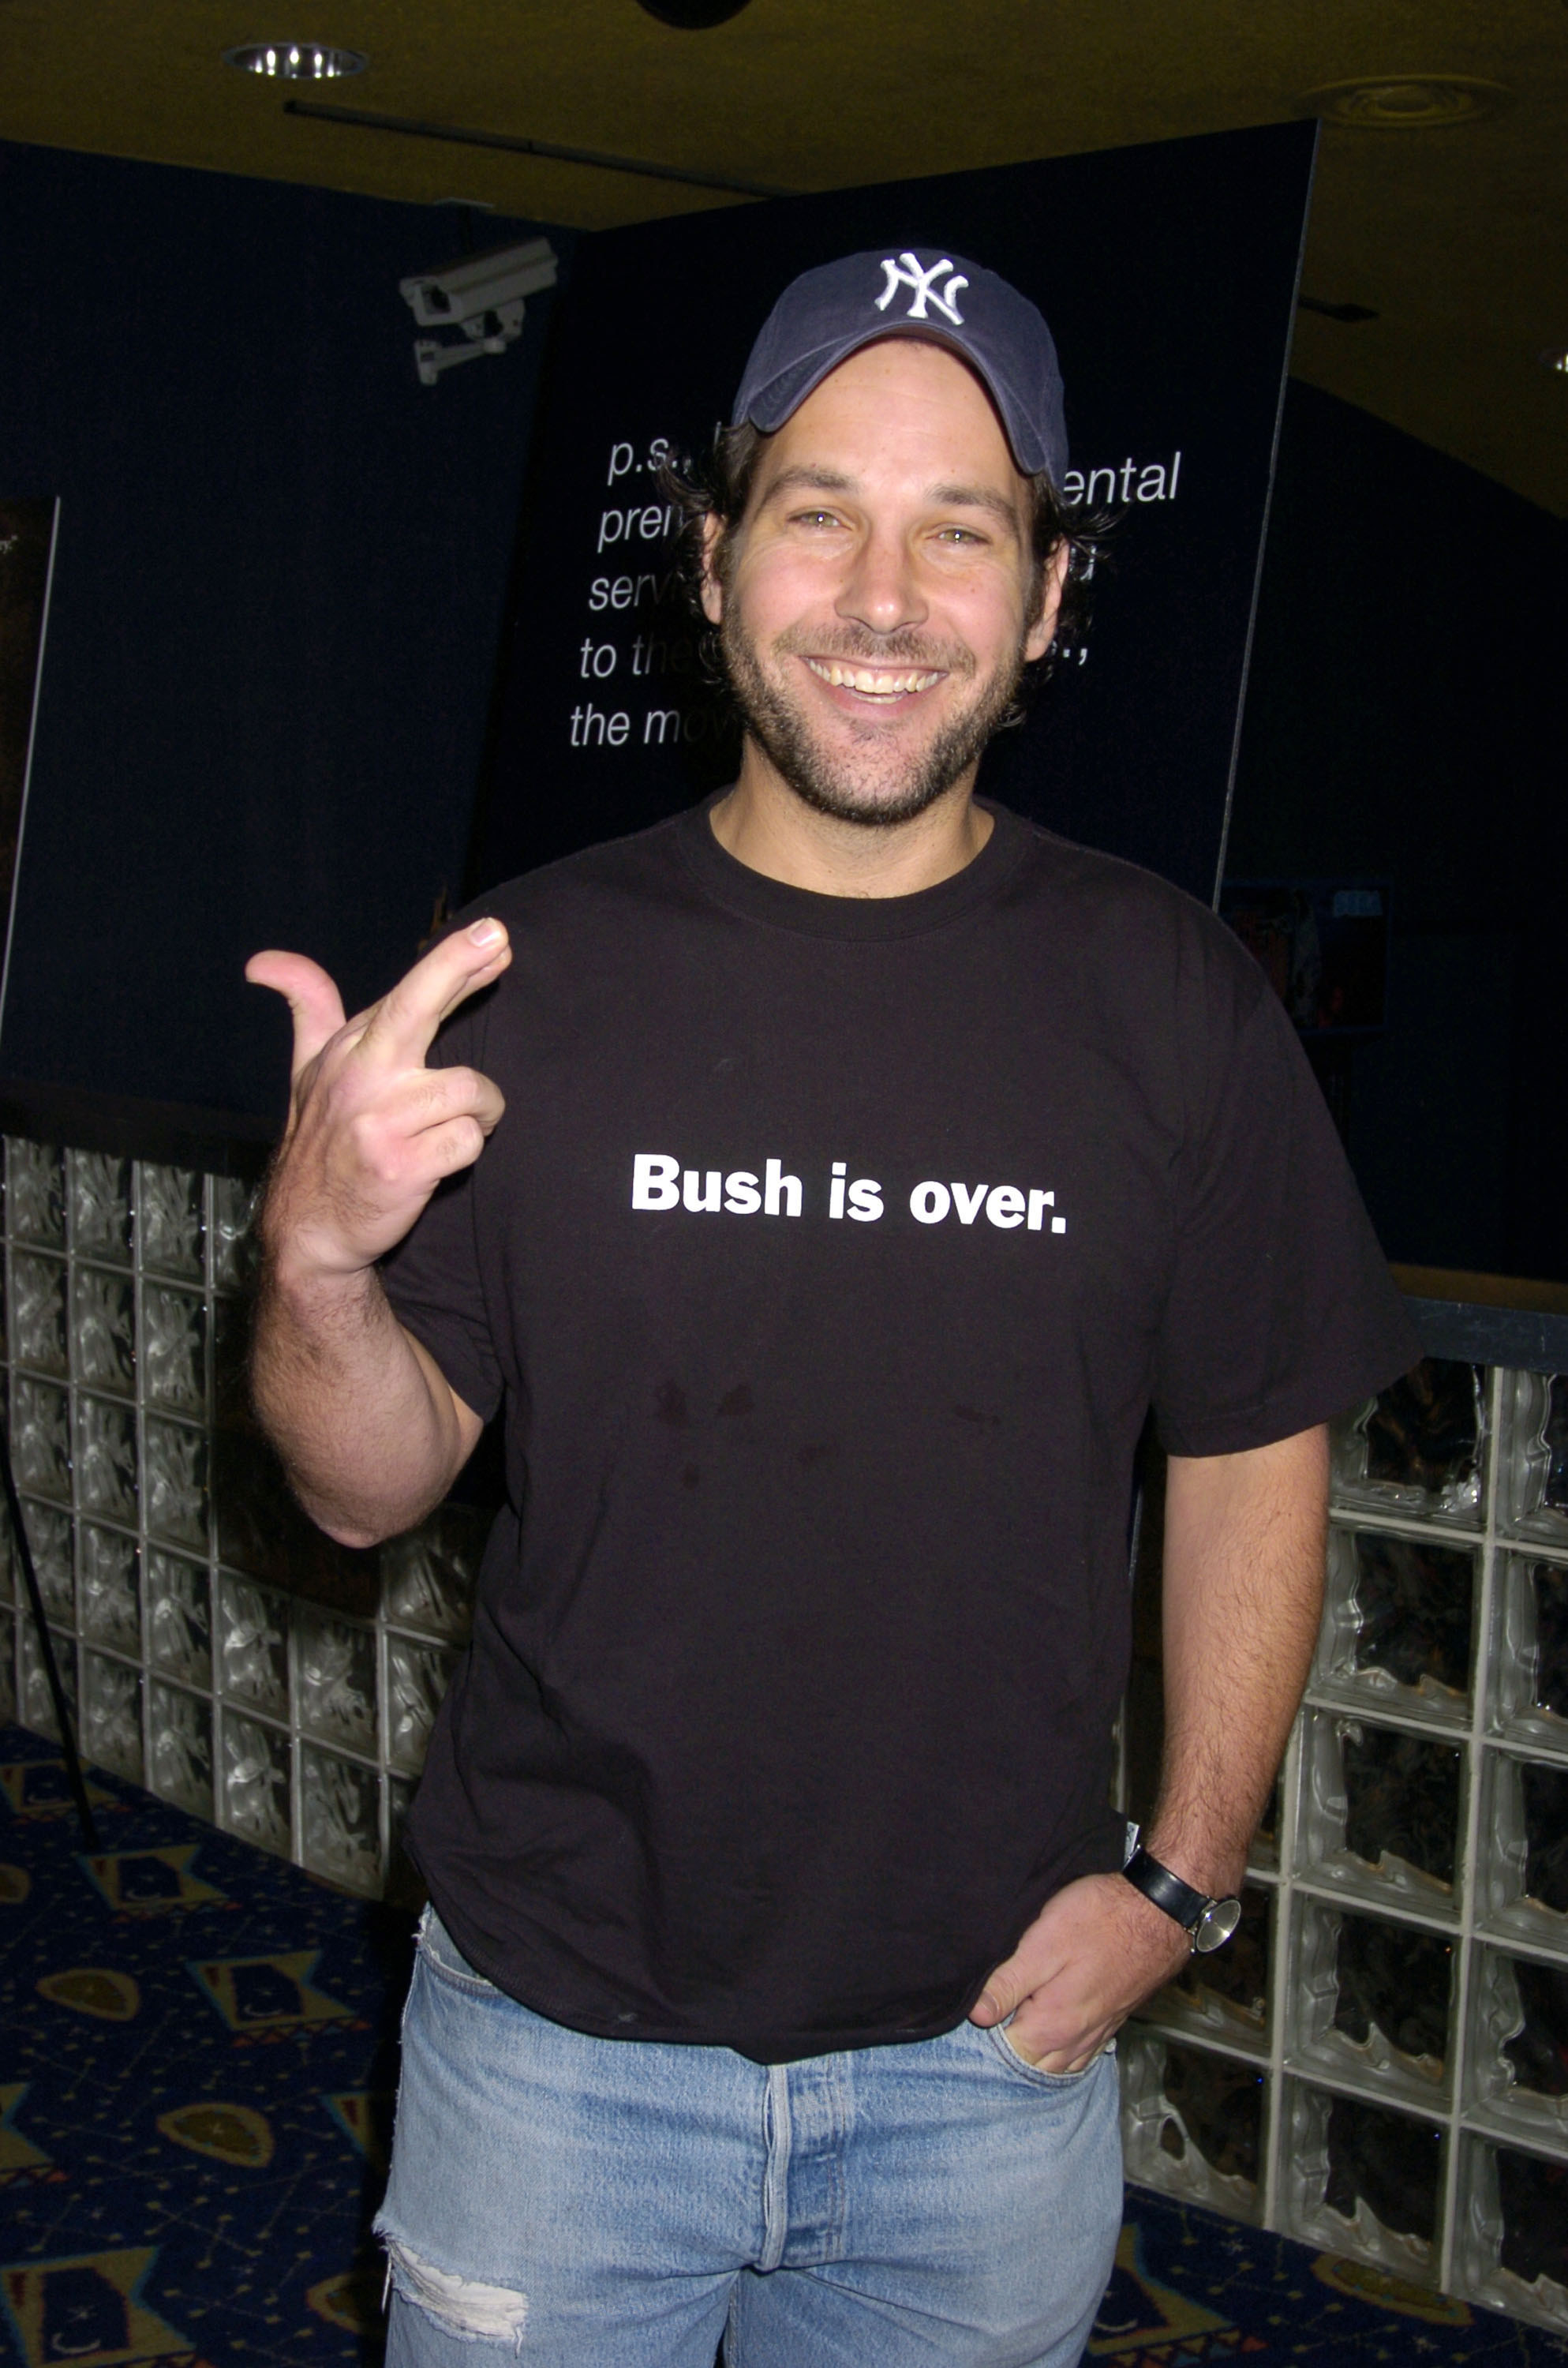 Paul smiling and wearing a &quot;Bush is over&quot; T-shirt